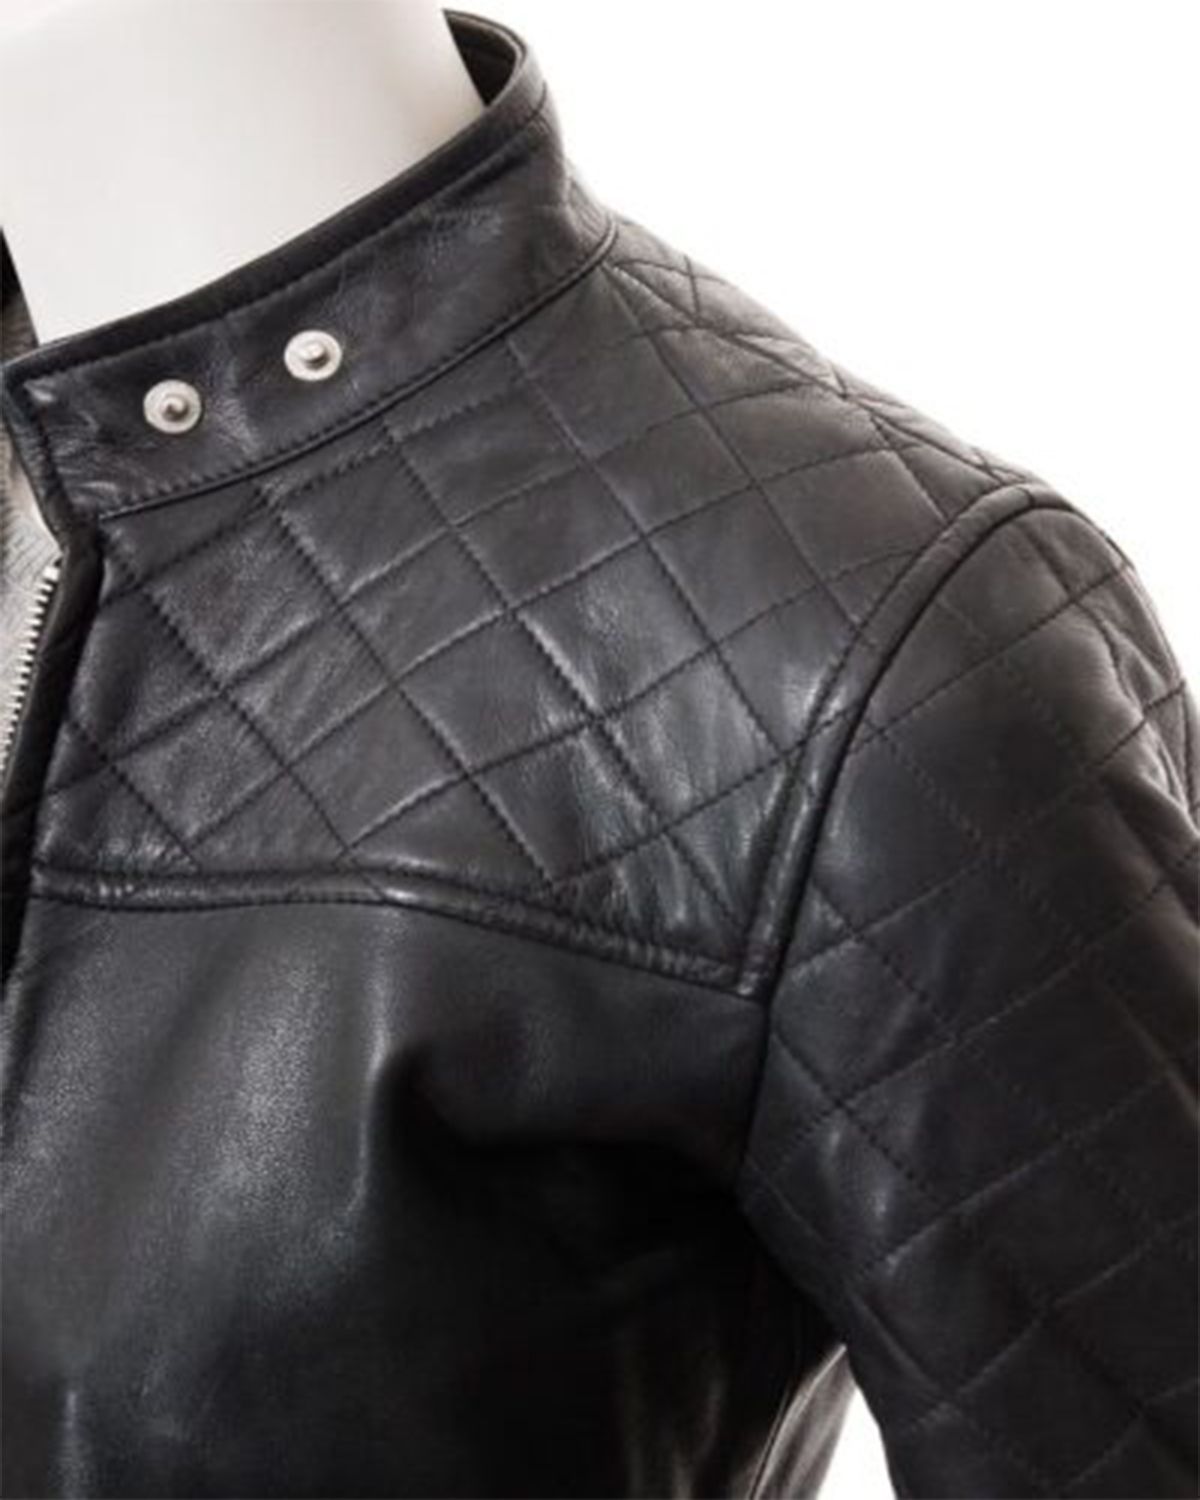 Women's Quilted Shoulder Stylish Biker Cafe Racer Style Real Leather Jacket